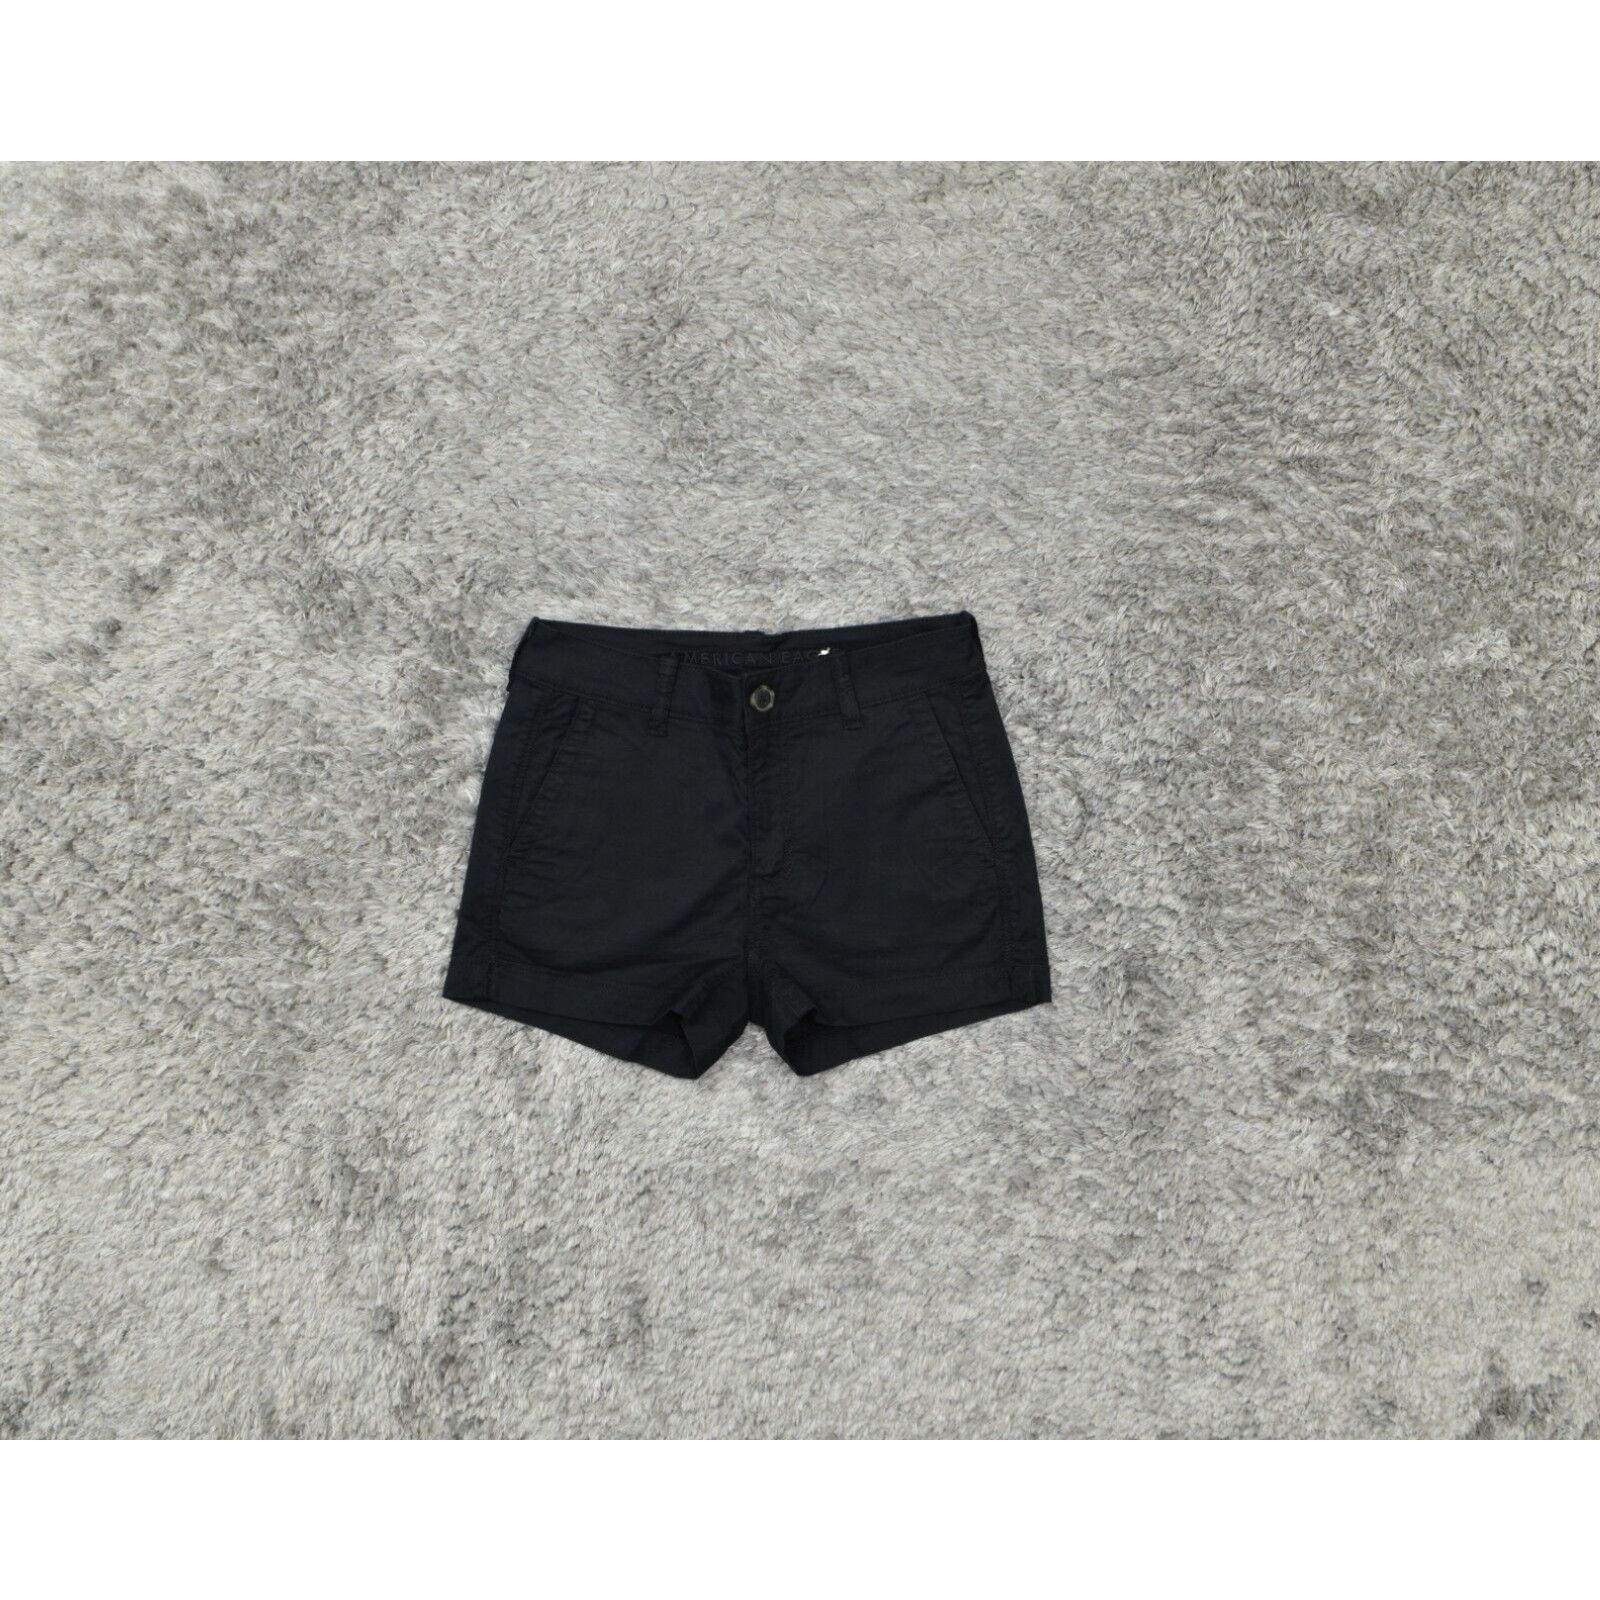 American Eagle Outfitters Solid Black Denim Shorts Size 6 - 62% off